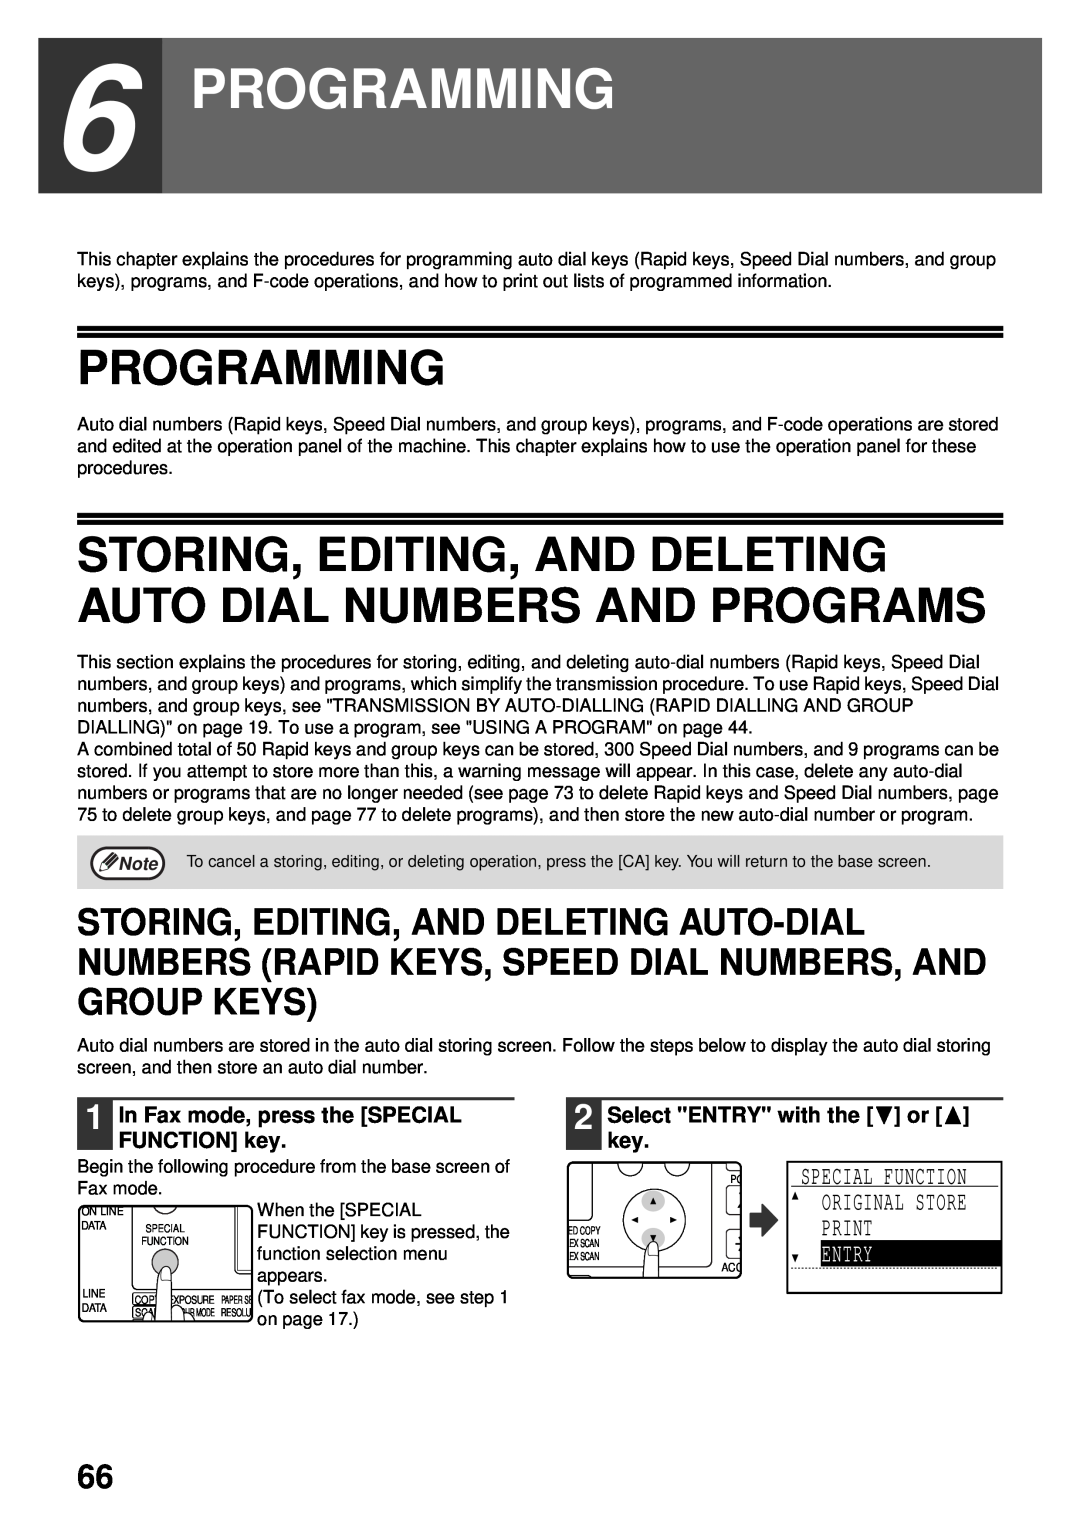 Sharp MX-FX13 appendix Programming, Storing, Editing, And Deleting Auto Dial Numbers And Programs, Entry 